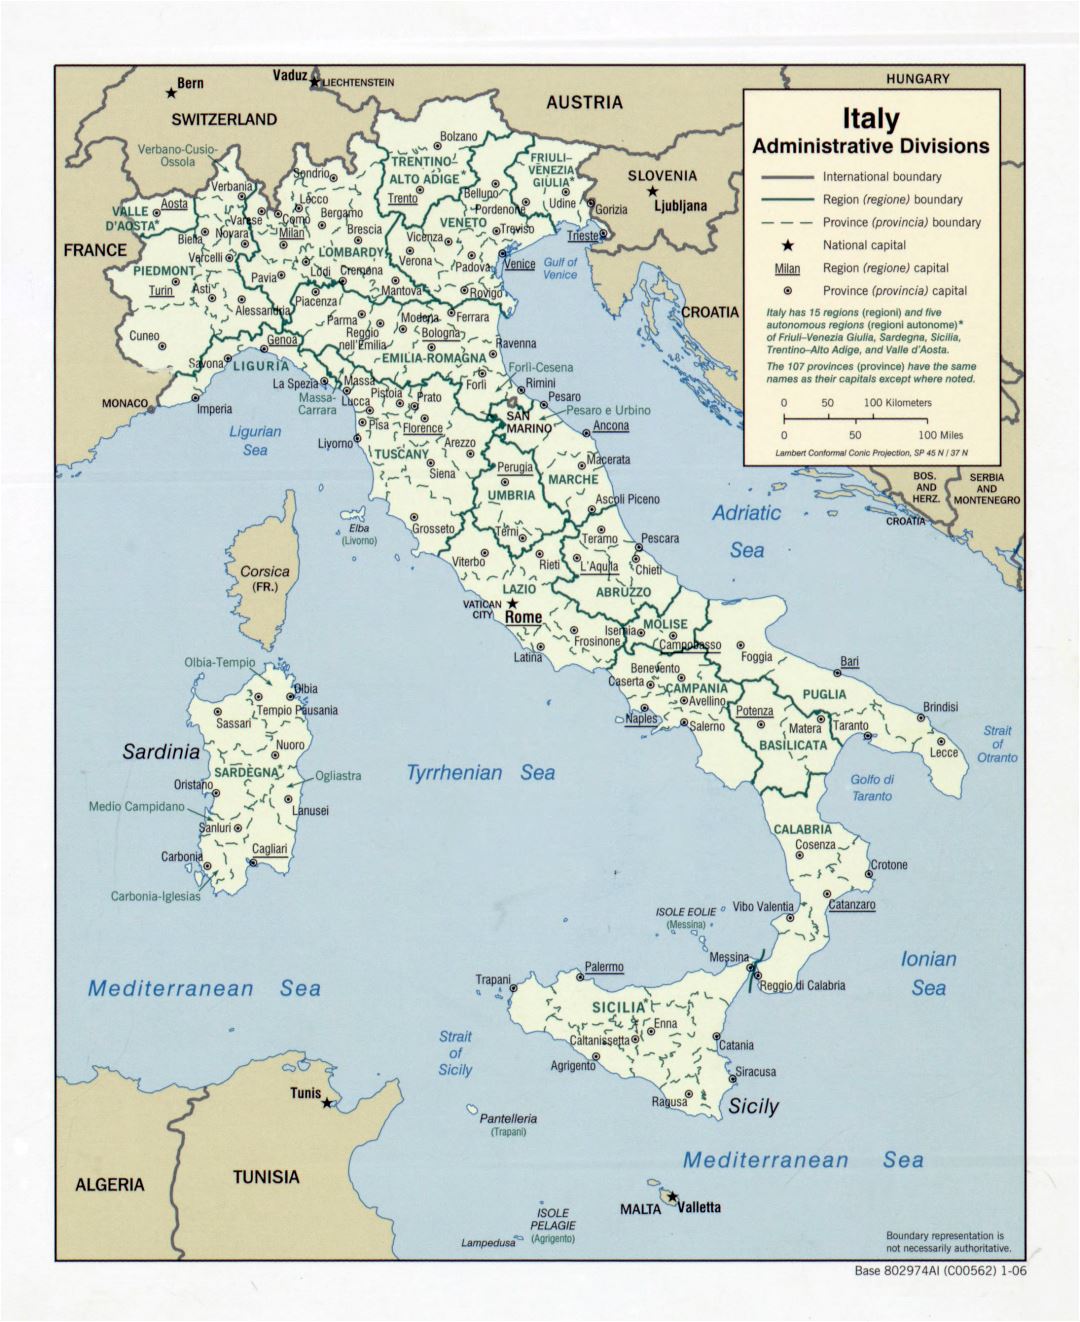 Large scale administrative divisions map of Italy - 2006